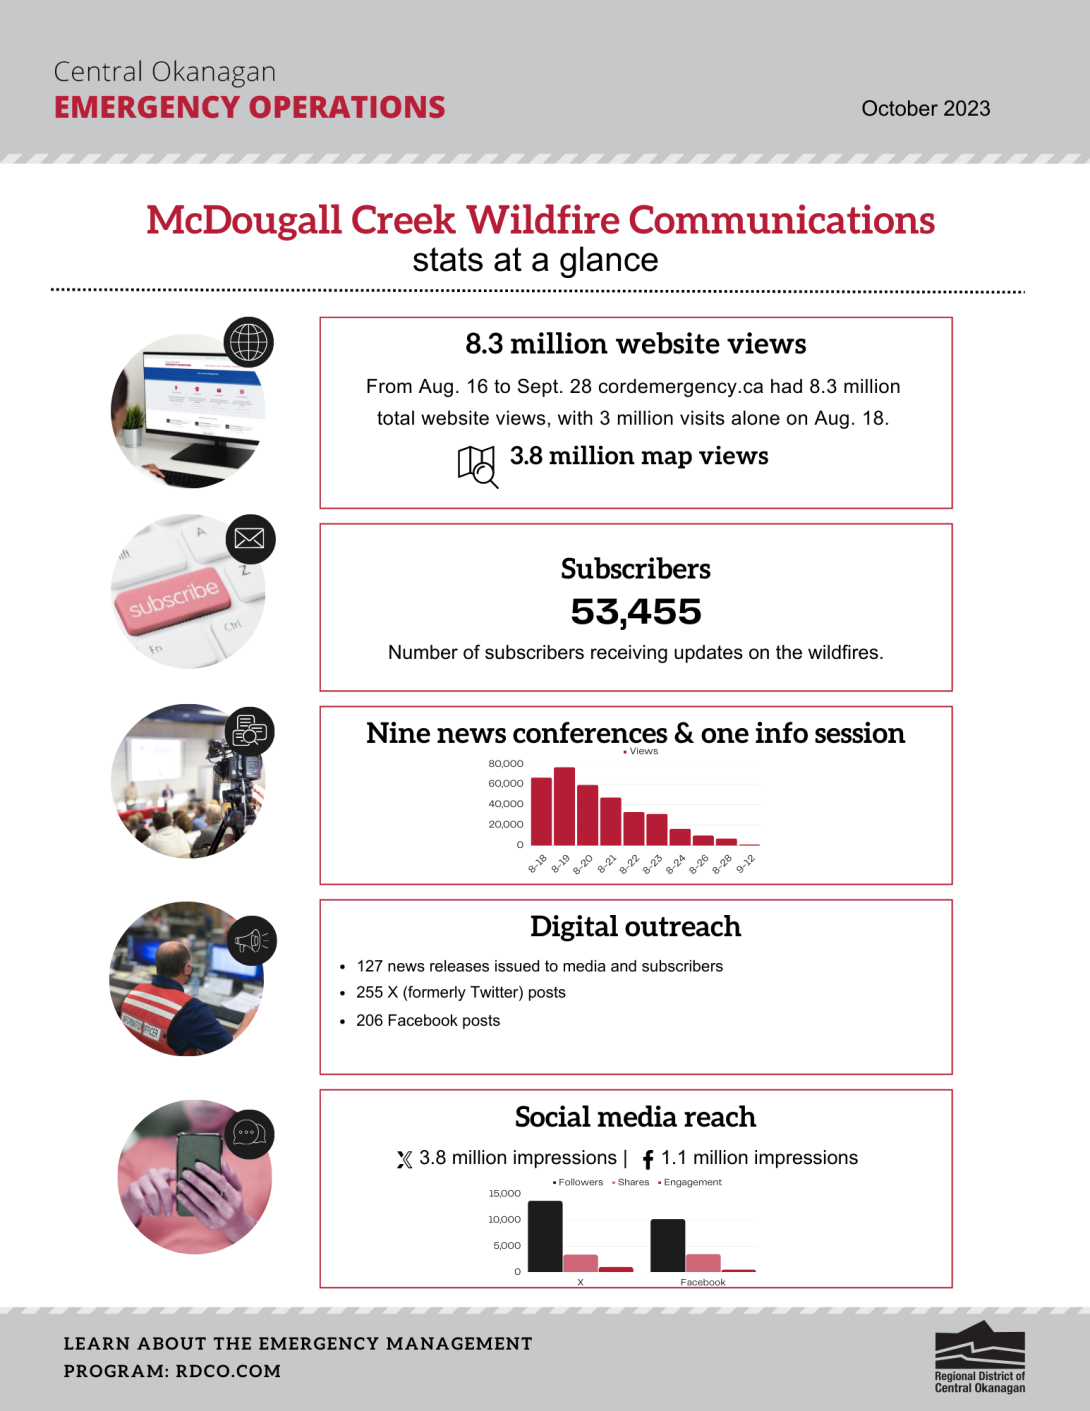 McDougall Creek Wildfire Communications at a glance